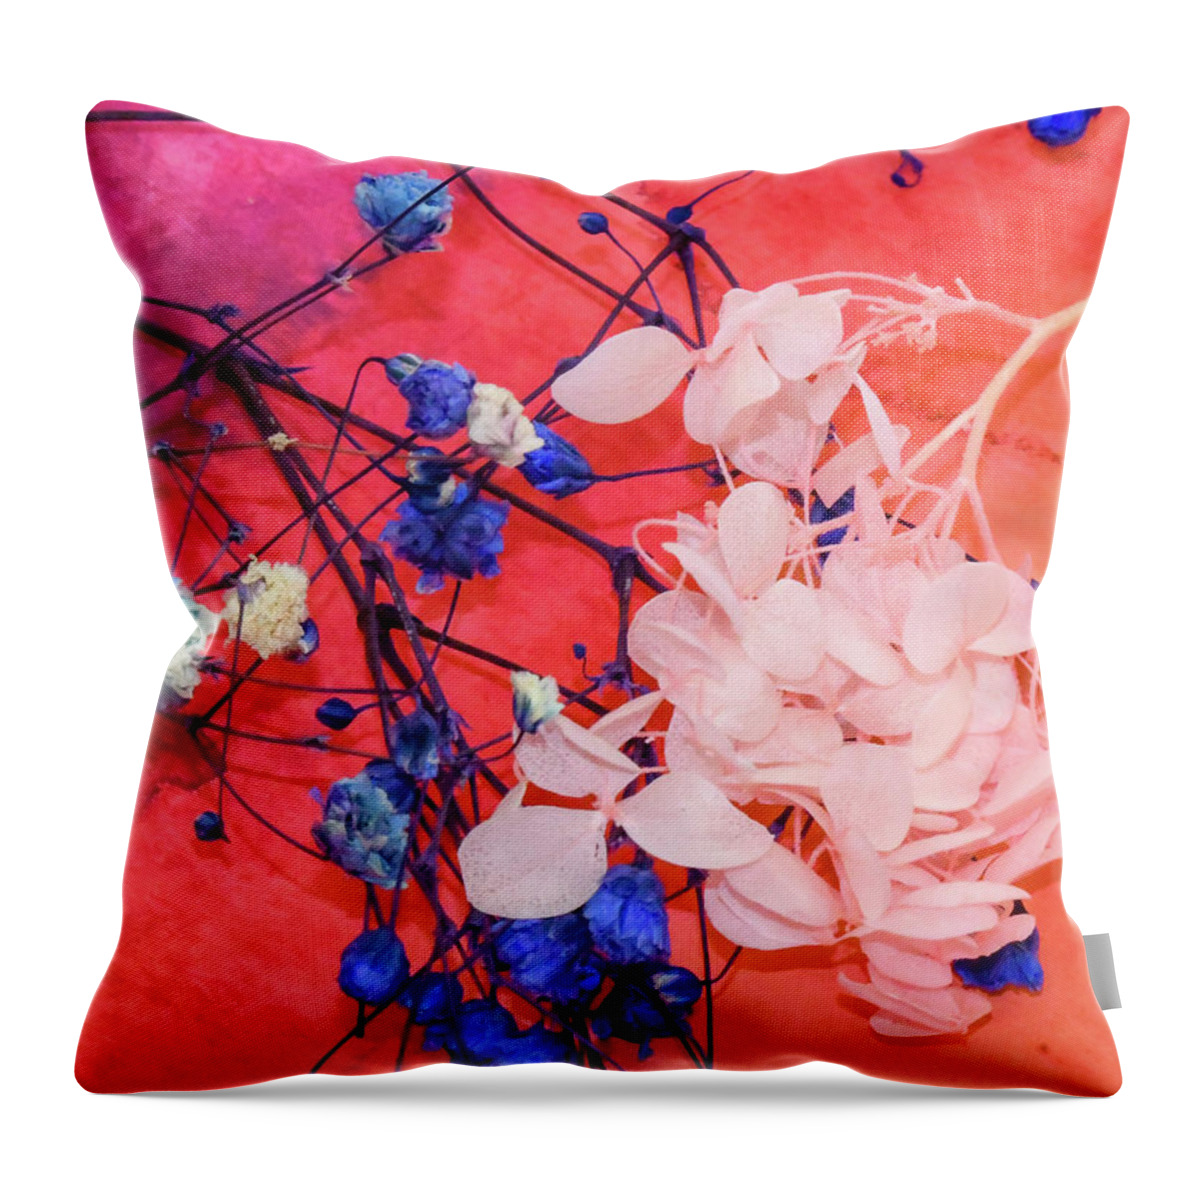 Coral Floral Throw Pillow featuring the photograph Coral Floral by Michelle Wittensoldner